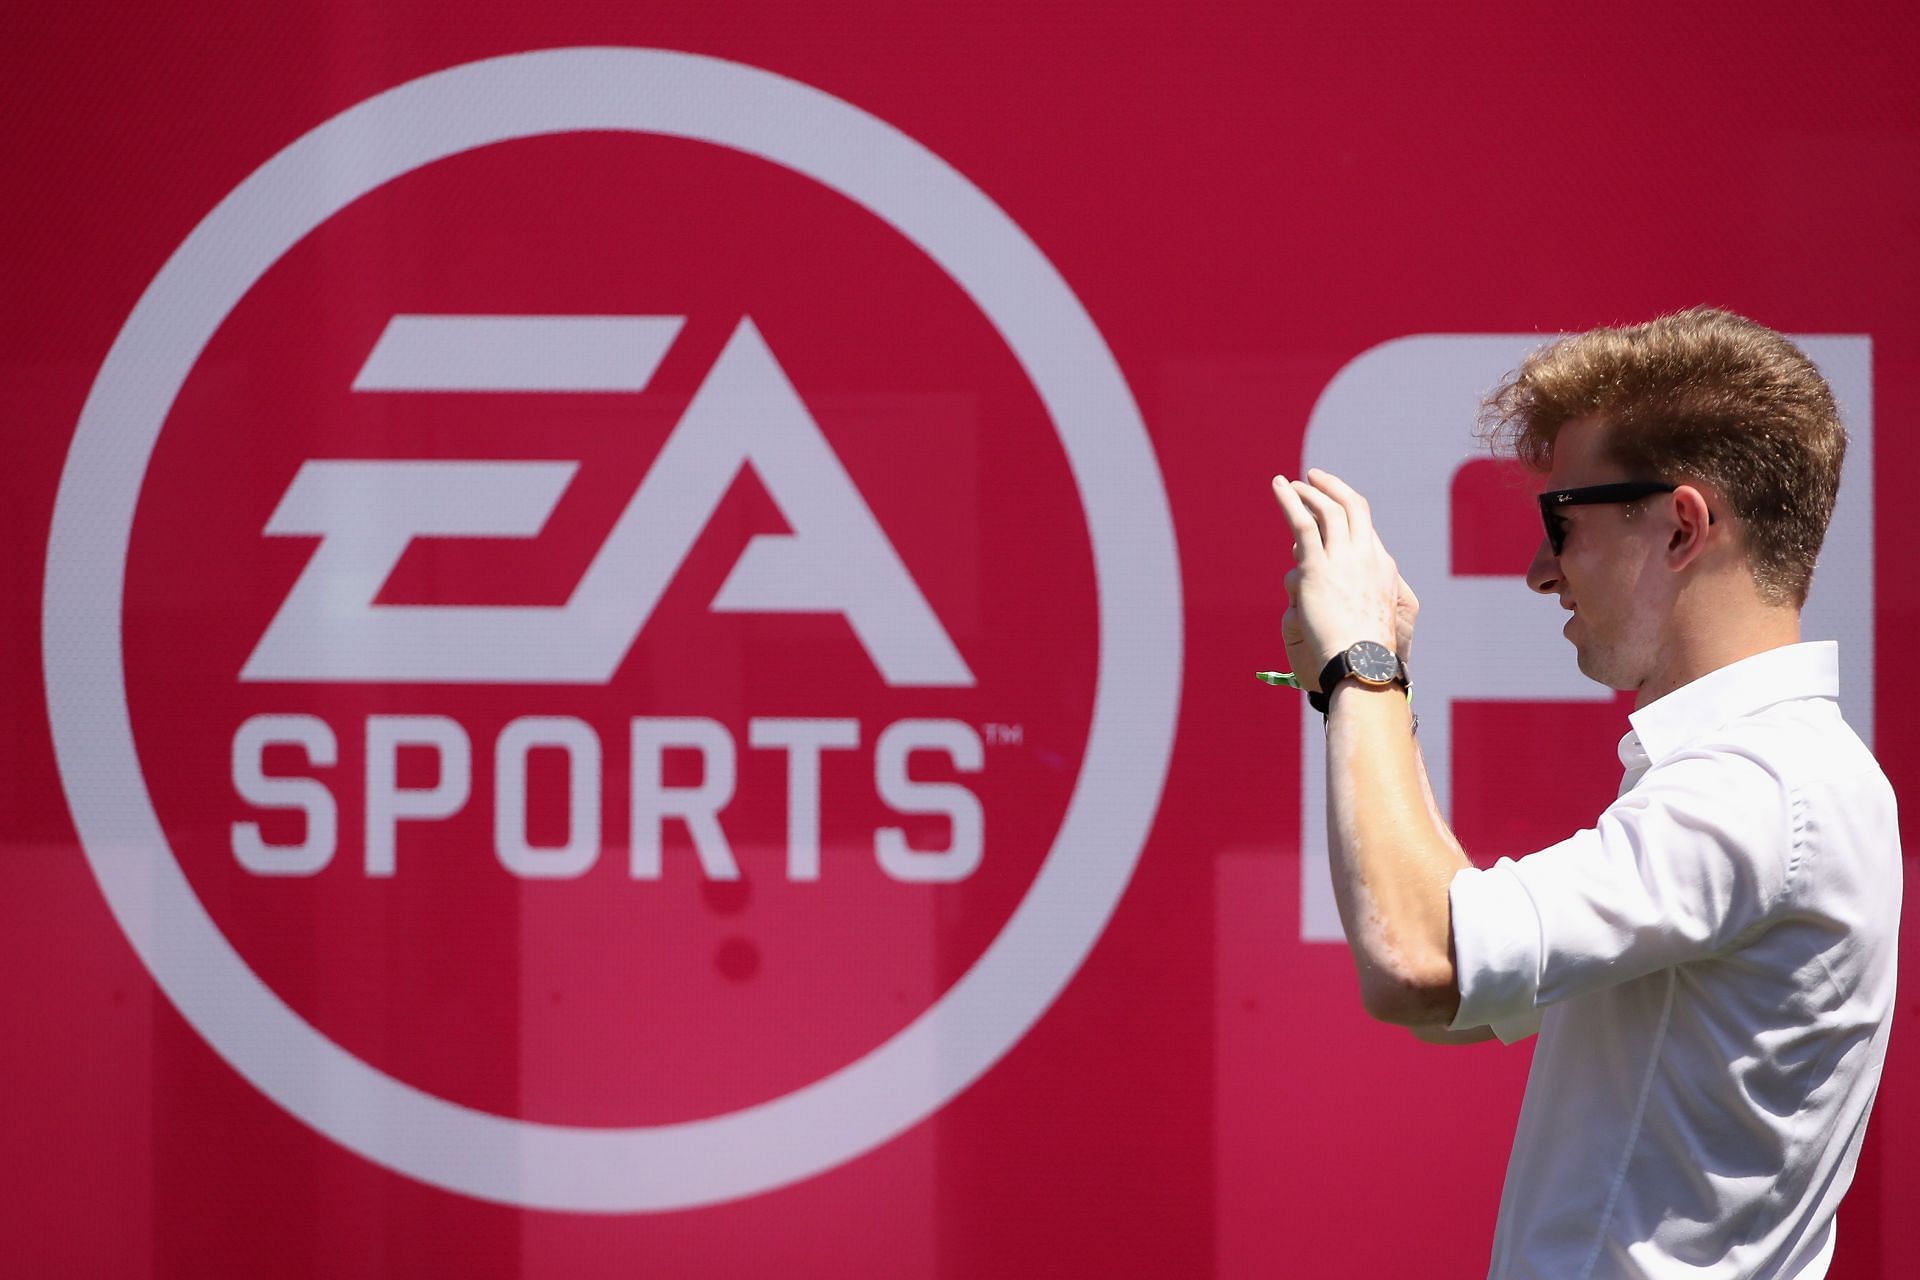 Electronic Arts Showcases Its New Games At E3 Event In Los Angeles